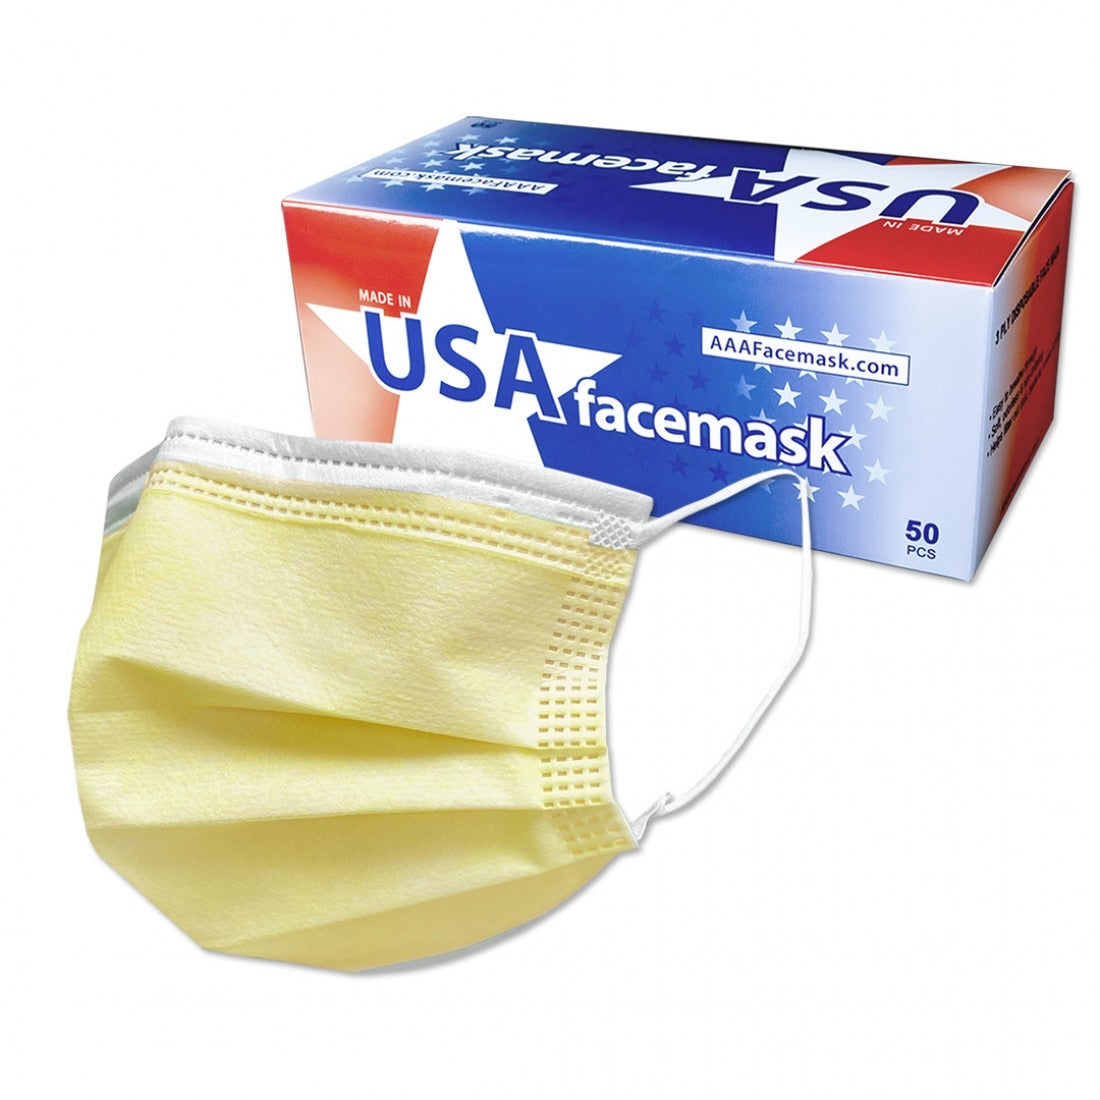 3 Layered Face Mask - 50 Masks - MADE IN THE USA